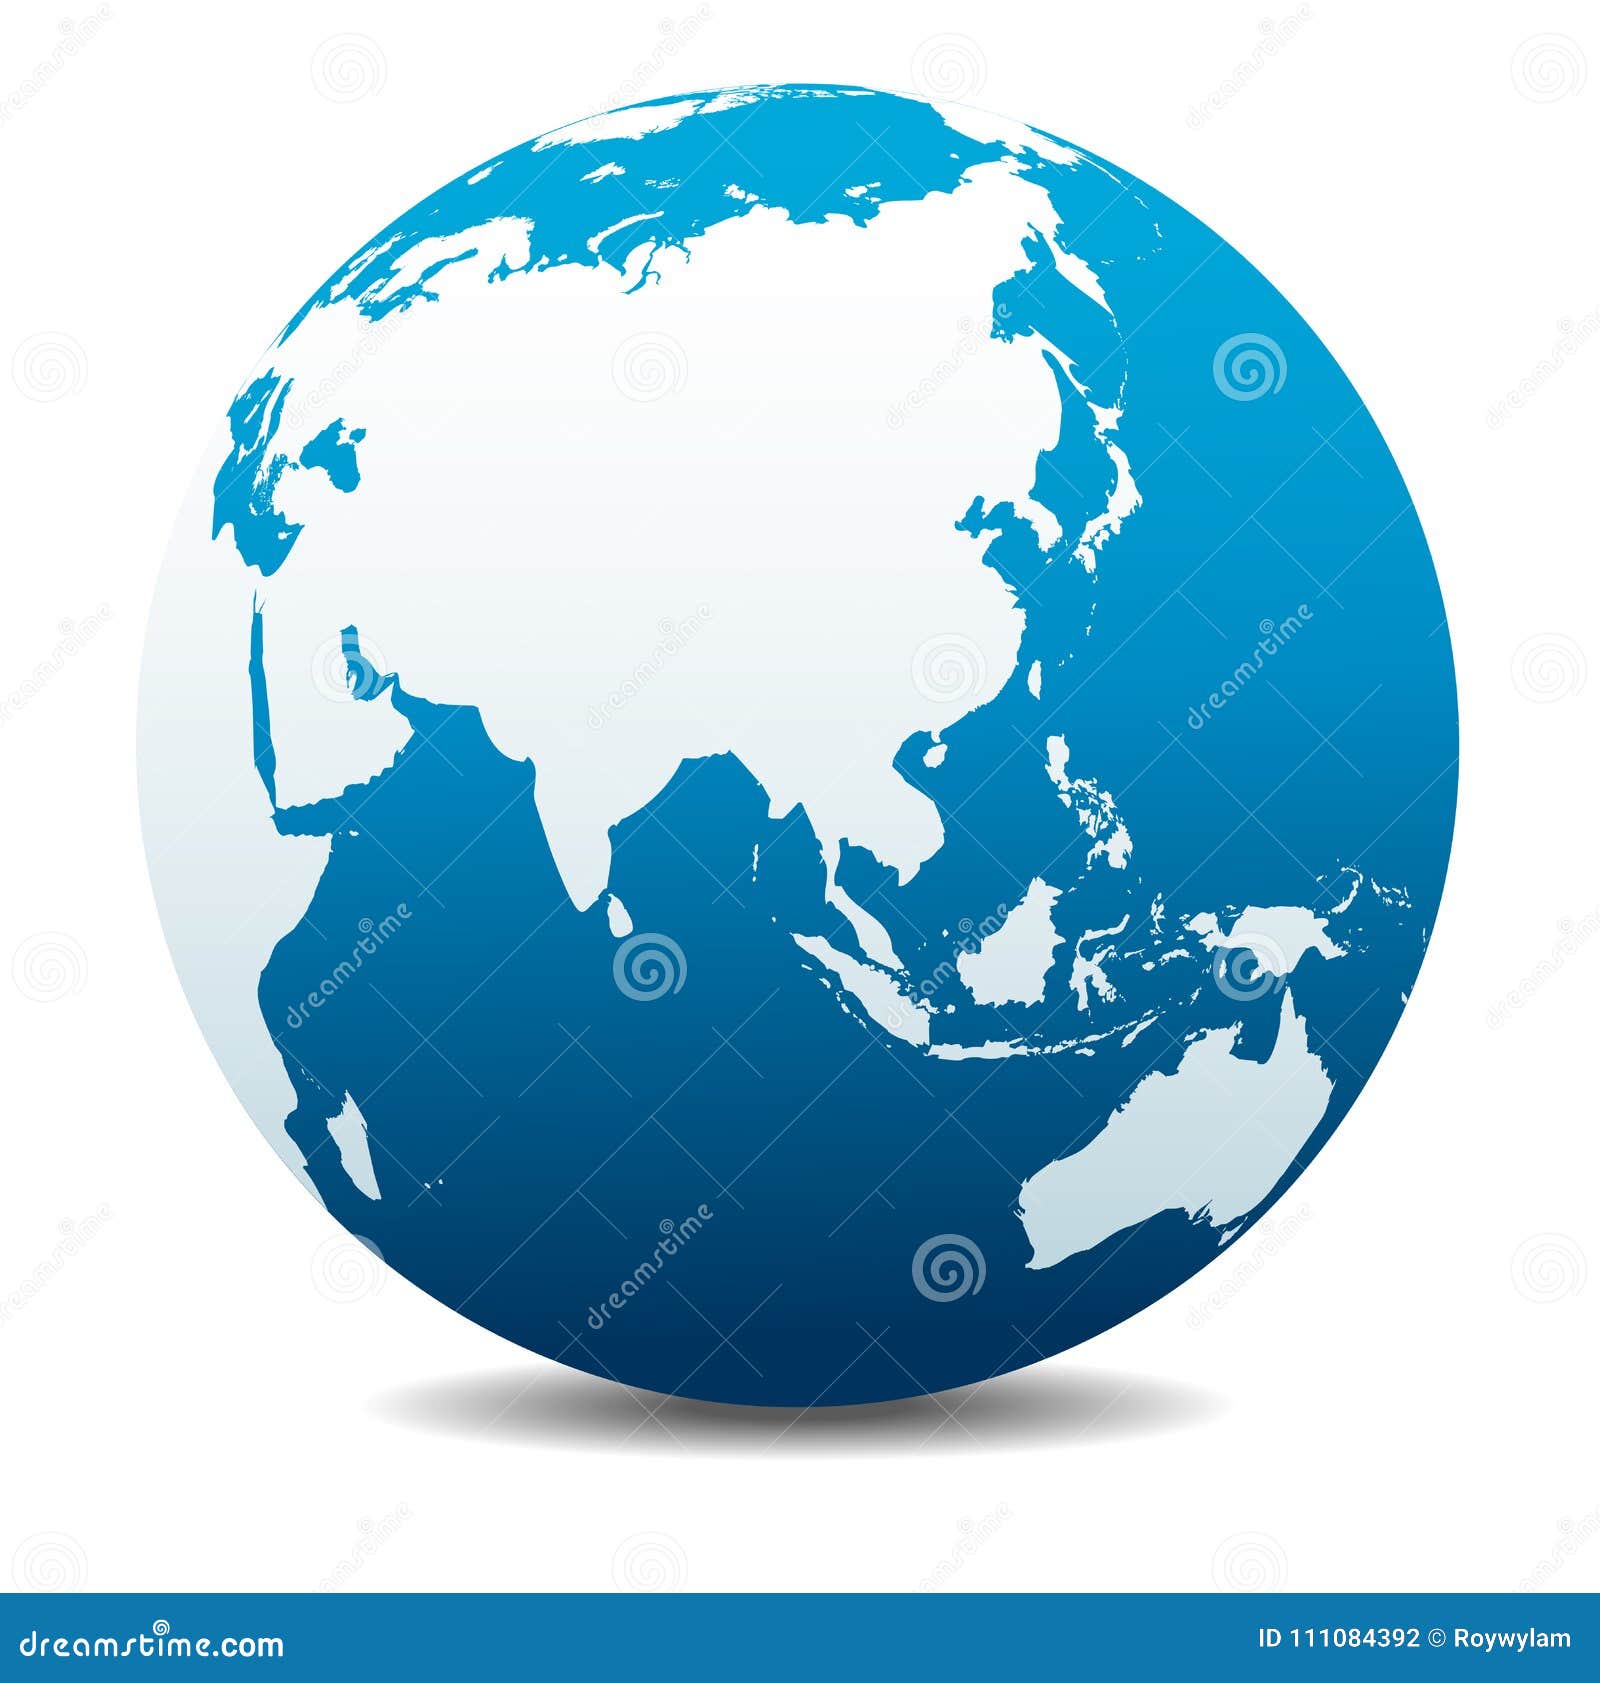 china and asia, far east global world icon planet earth